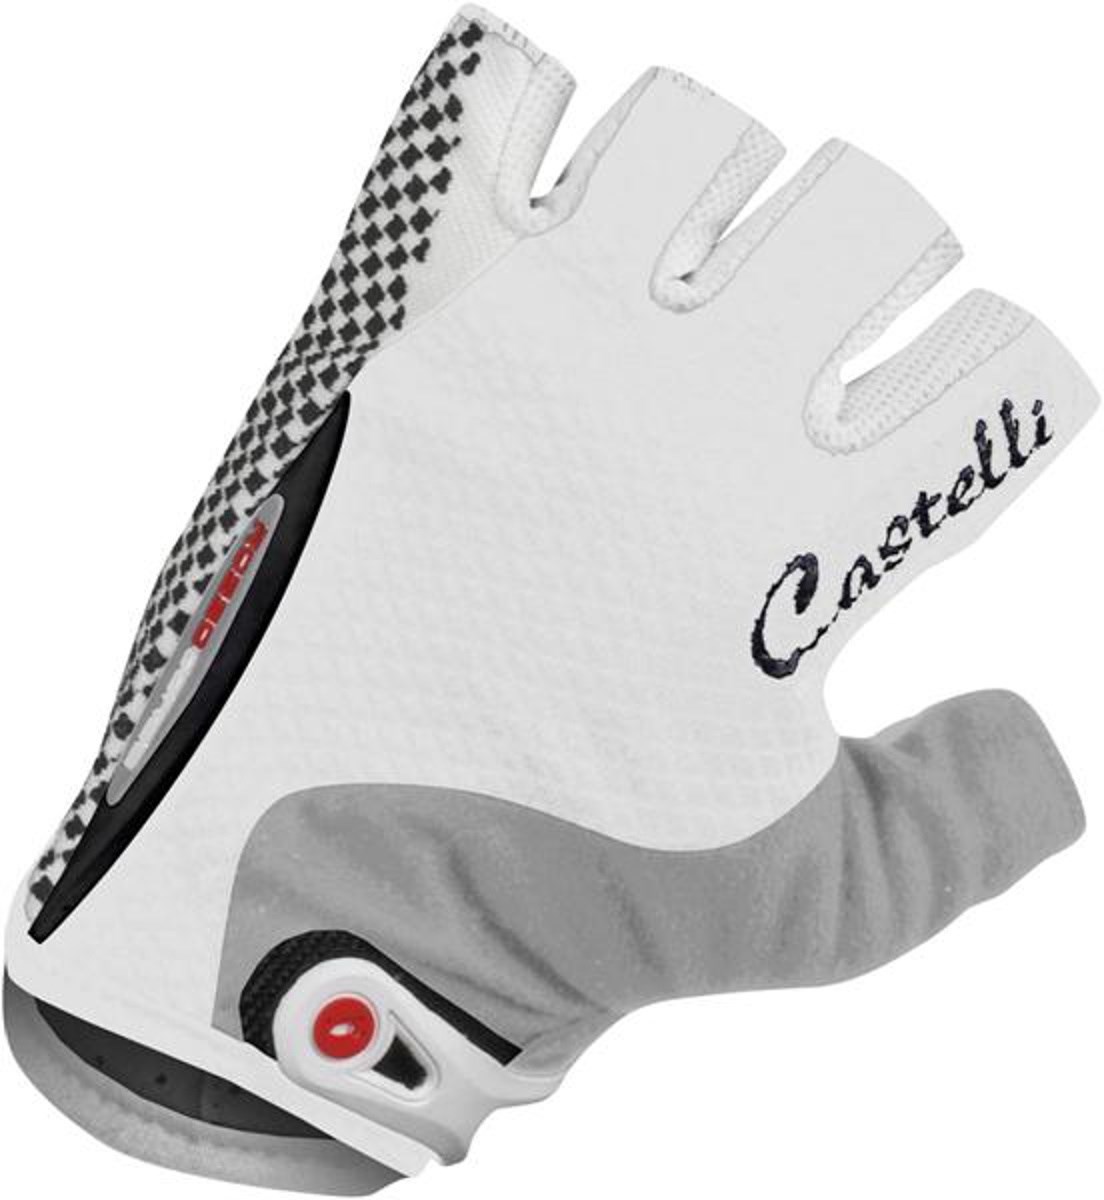 Castelli S Rosso Corsa Womens Short Finger Cycling Gloves product image